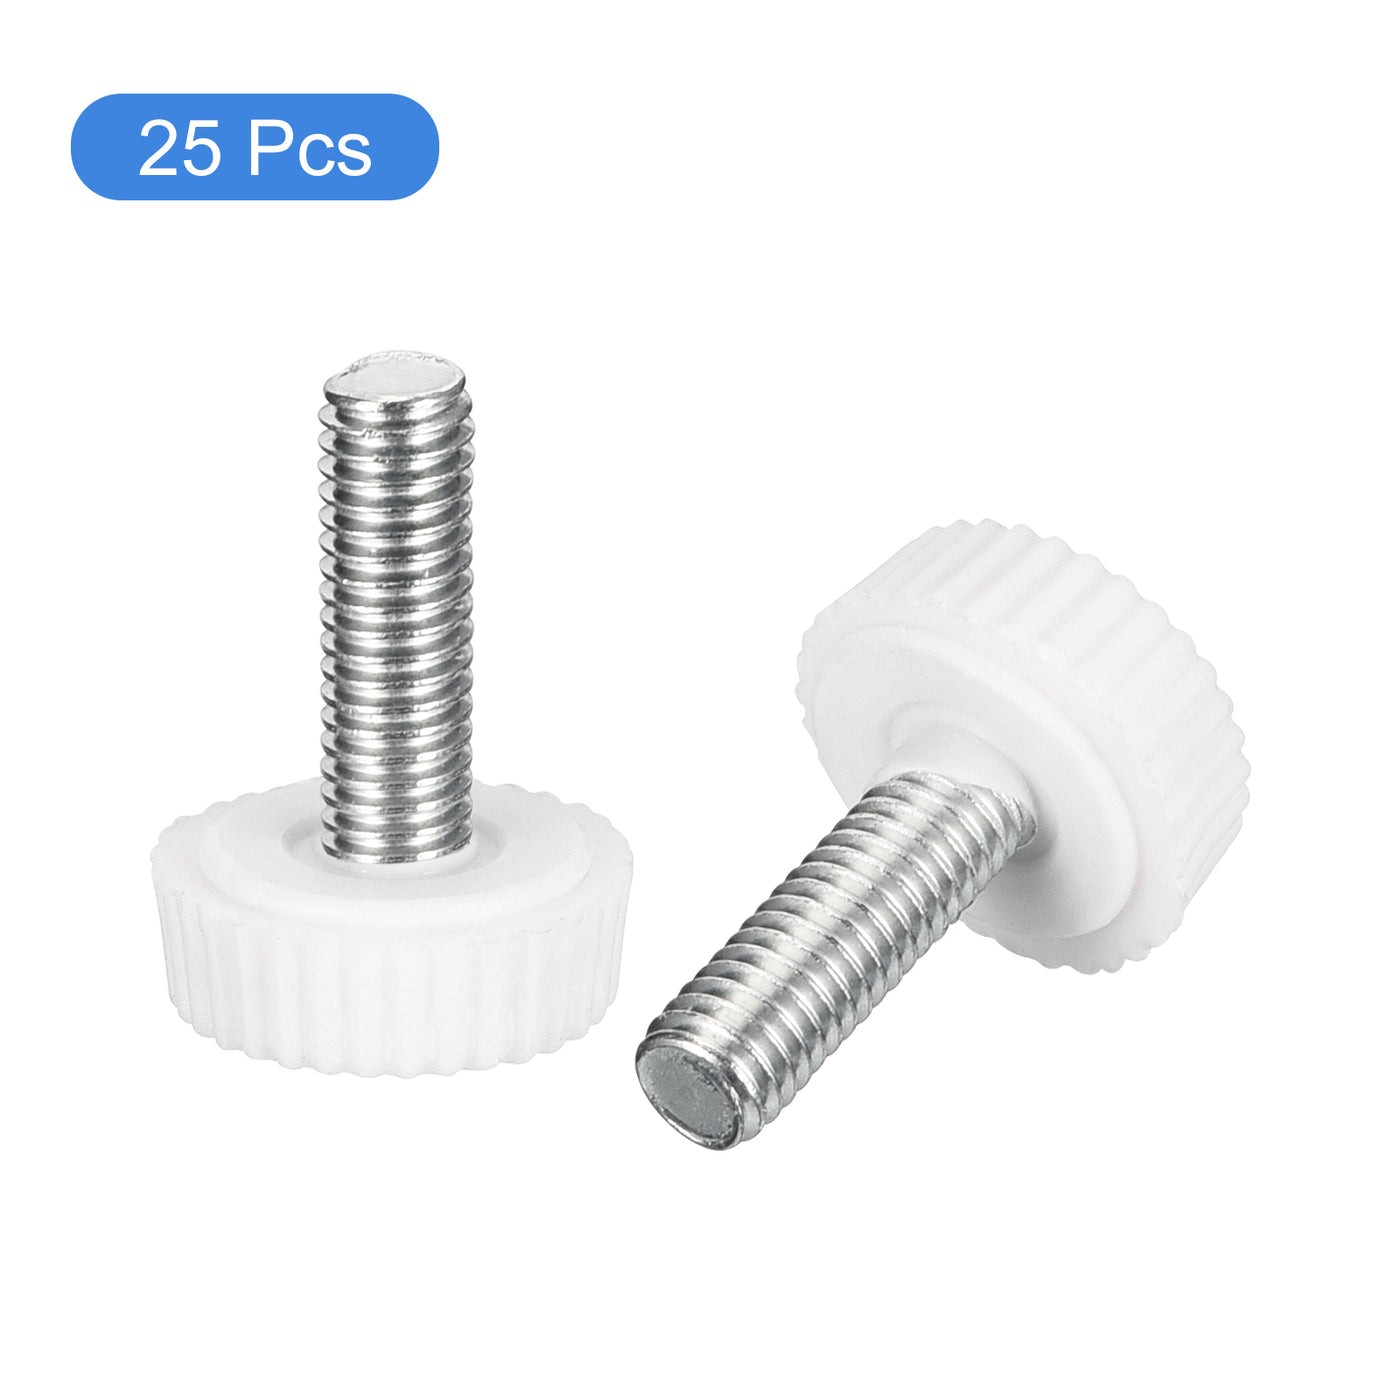 uxcell Uxcell 25Pcs M5x16mm Threaded Knurled Thumb Screws, Zinc Plated Carbon Steel White